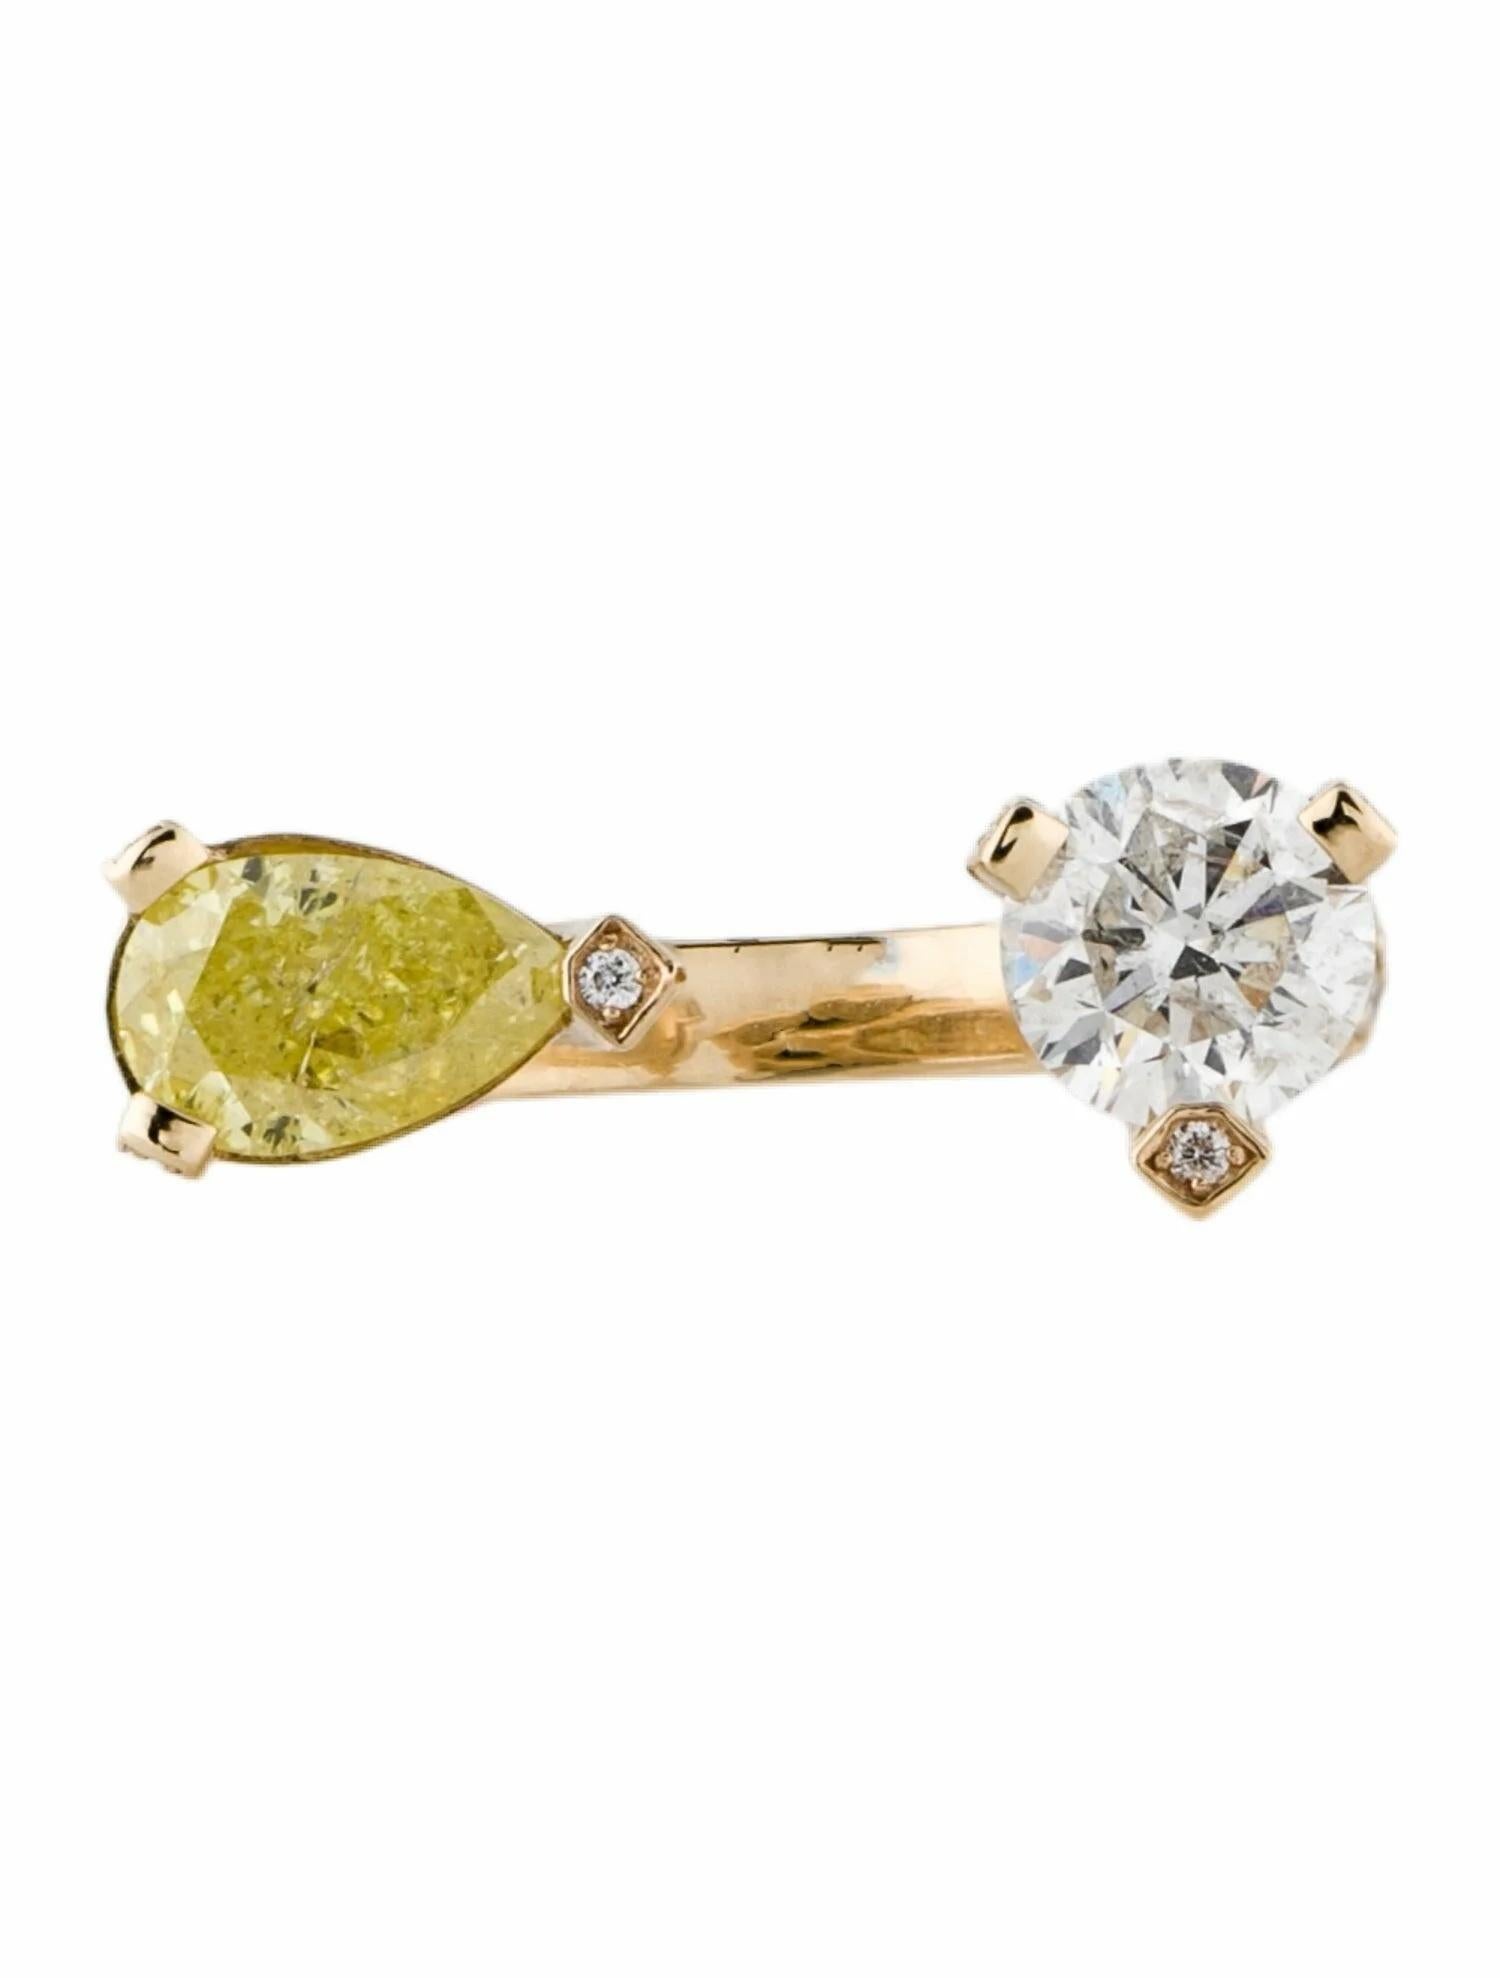 Mixed Cut Toi et Moi Bypass Diamond Ring 1 Ct Fancy Intense Yellow PS & 1.03 Ct H Round For Sale